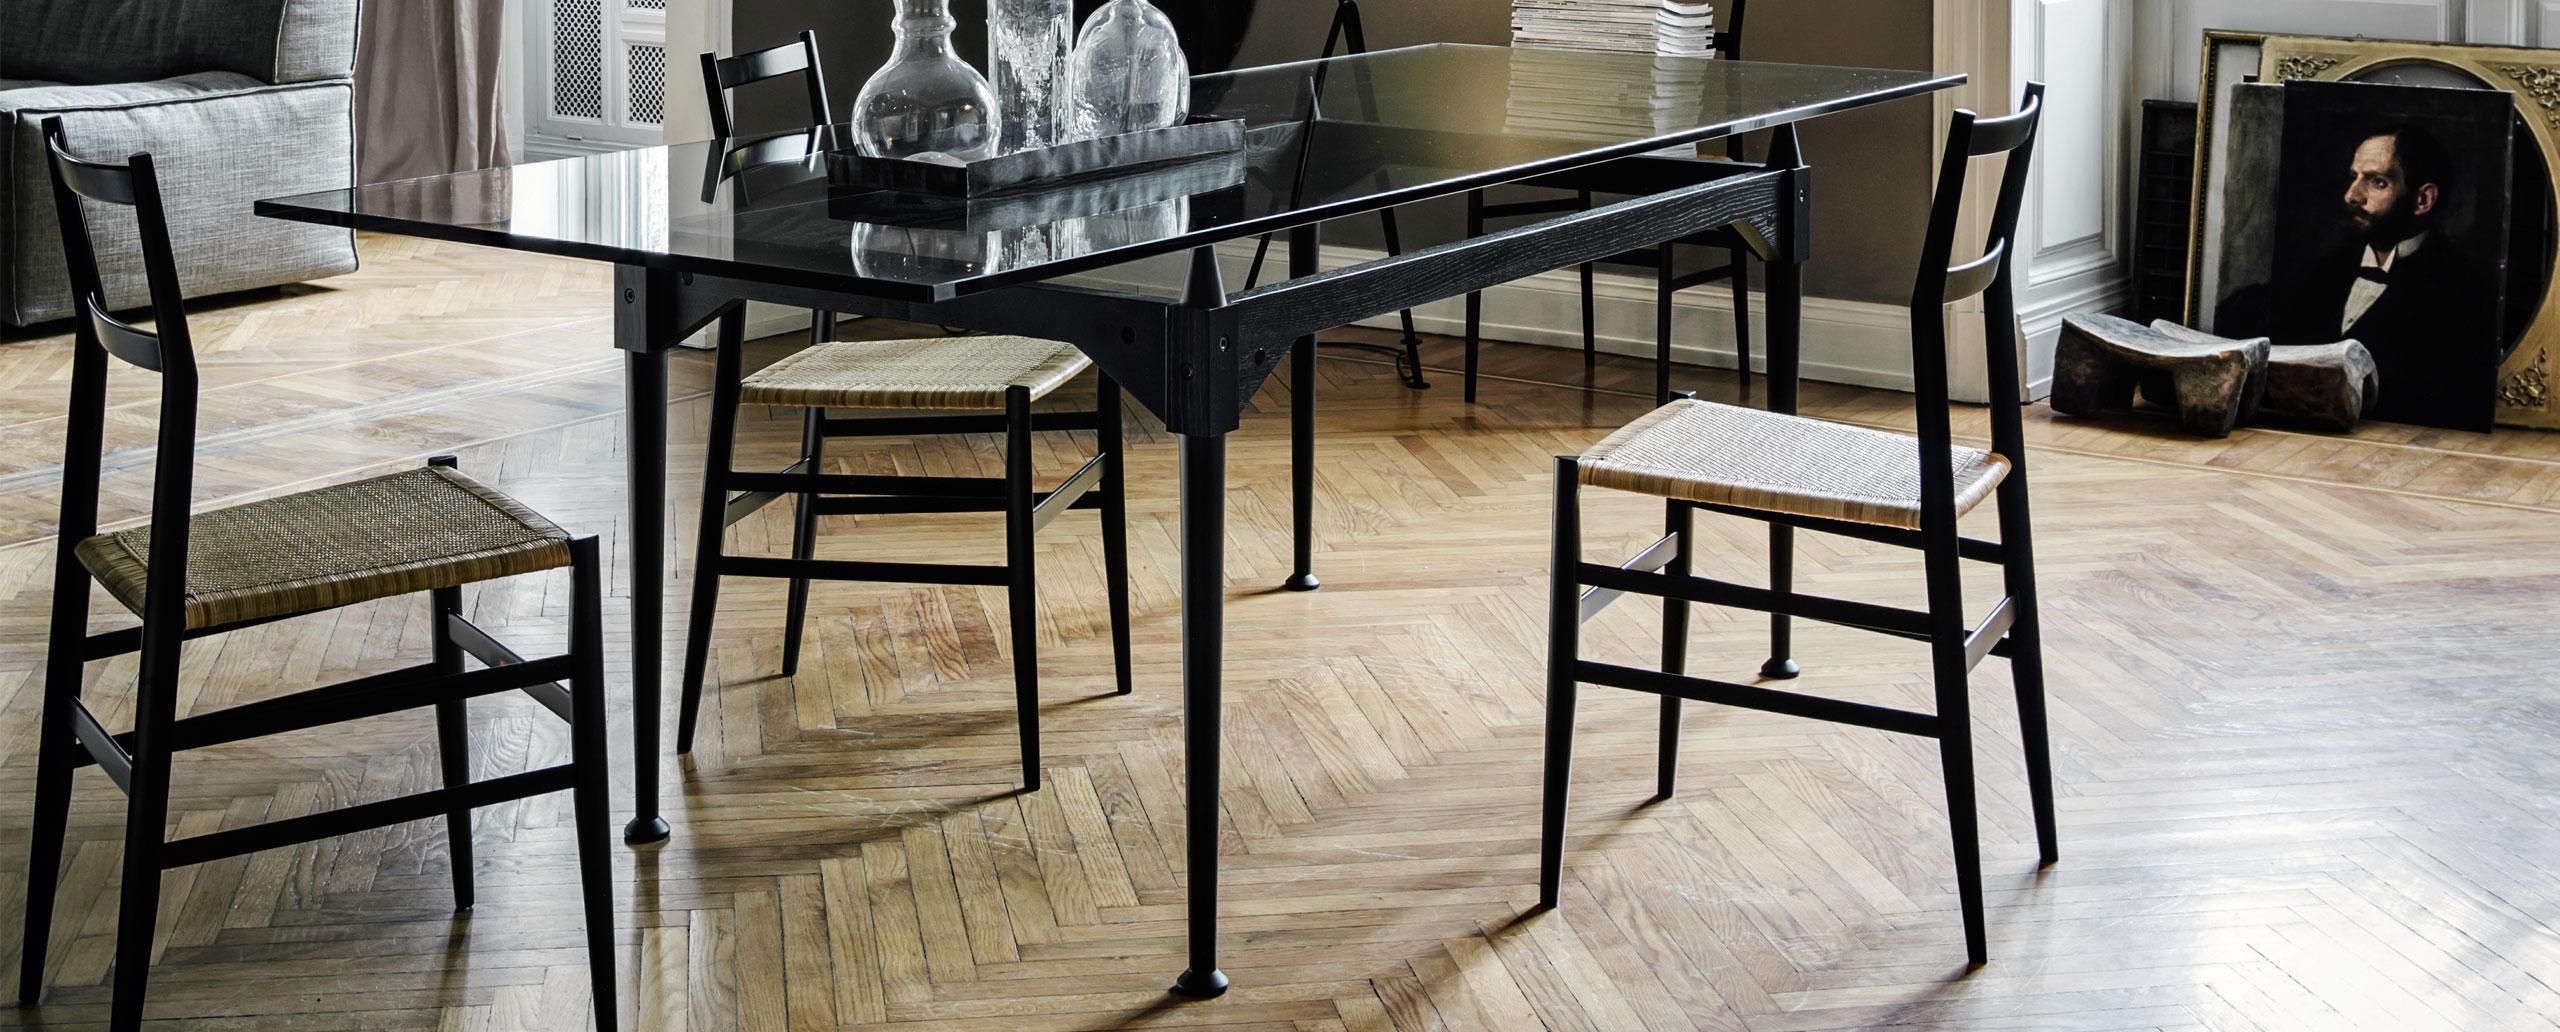 Franco Albini Tl3 Table, Black Dyed Wood and Glass by Cassina In New Condition For Sale In Barcelona, Barcelona